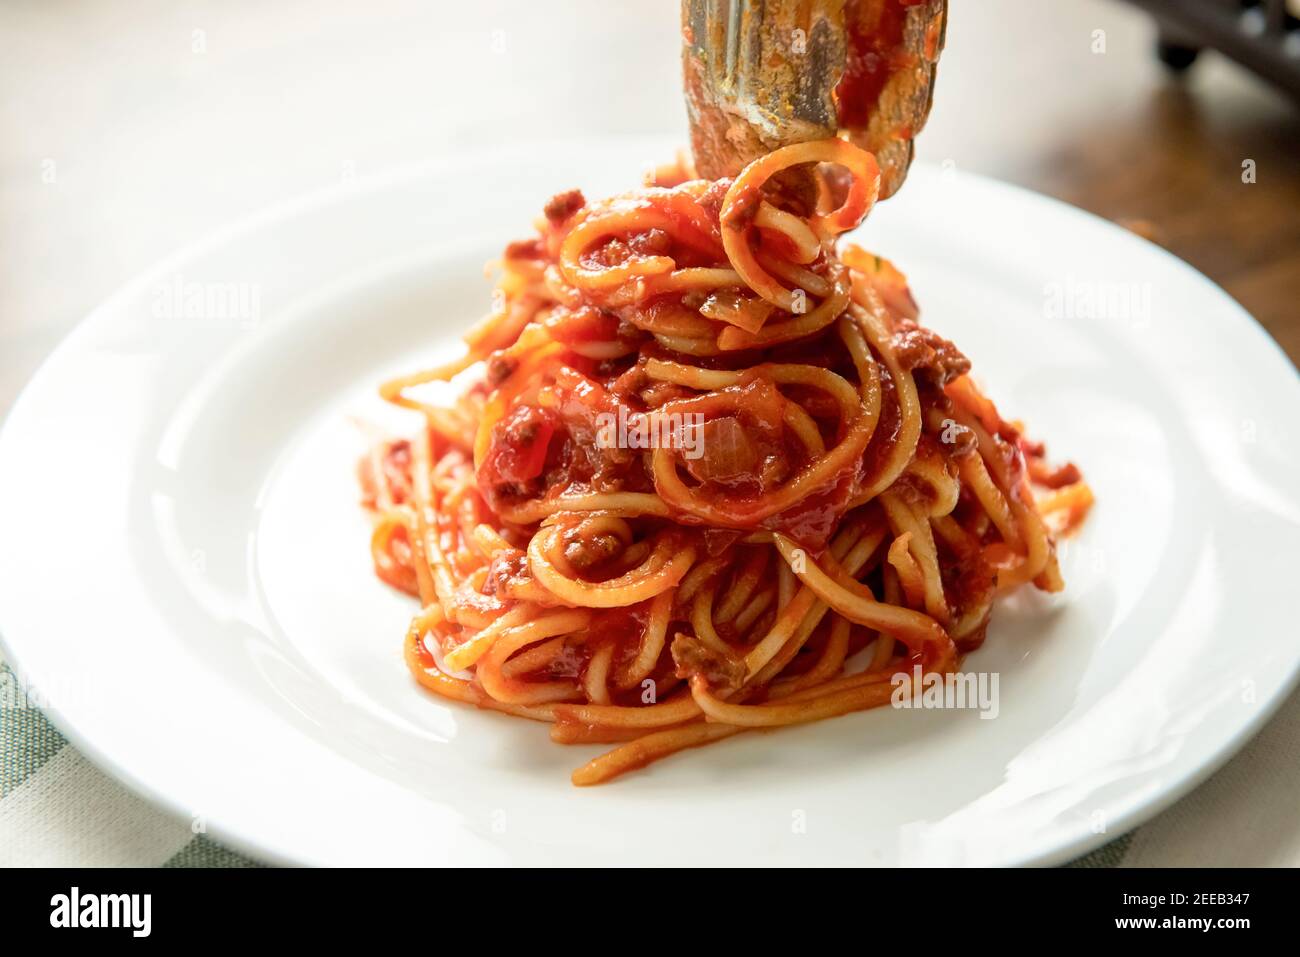 Traditional Italian spaghetti bolognese pasta being plated at the table Stock Photo